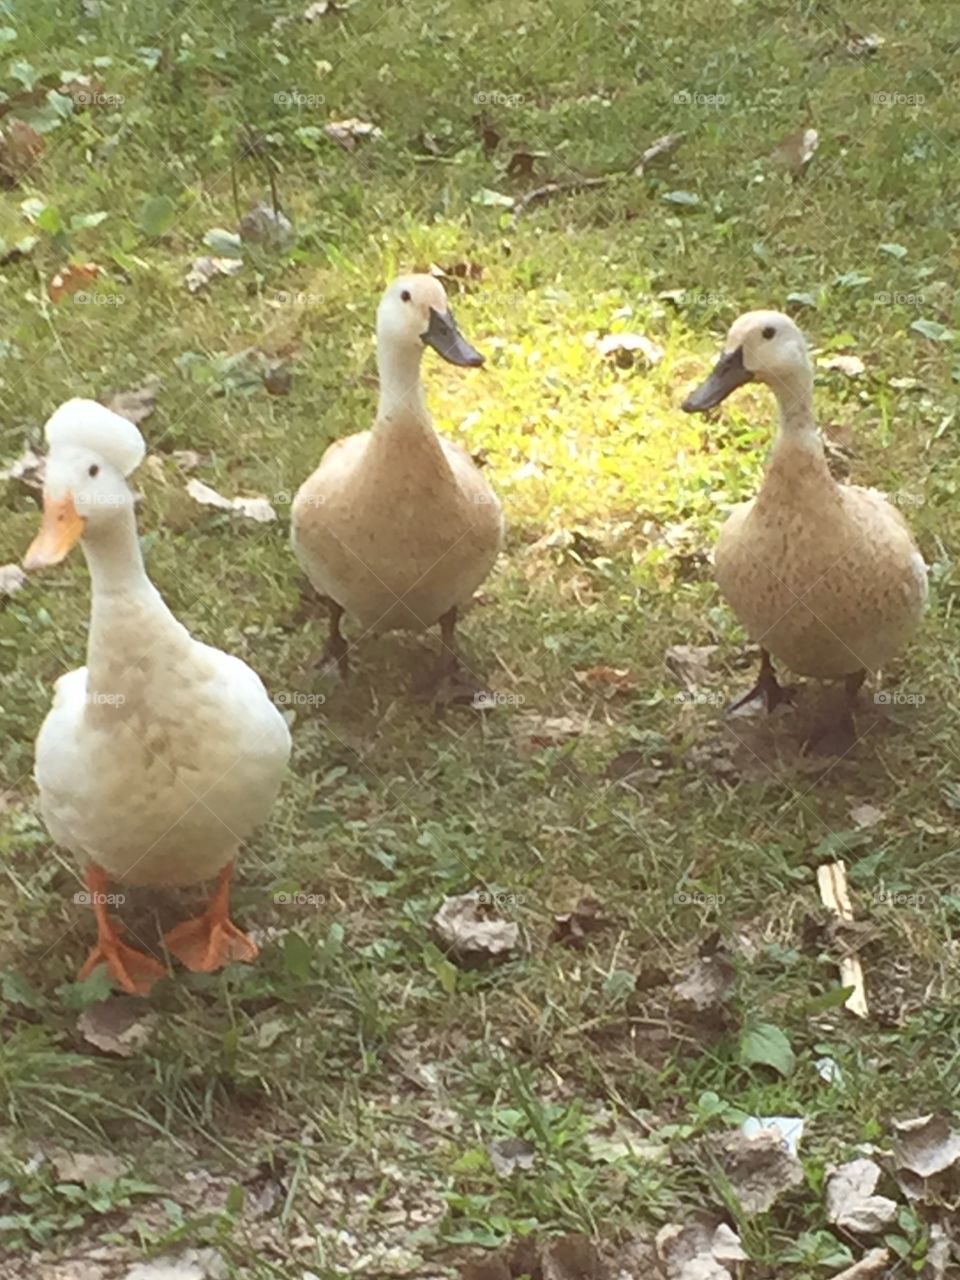 Three ducks that walked up to our campsite.  White and tan ducks.